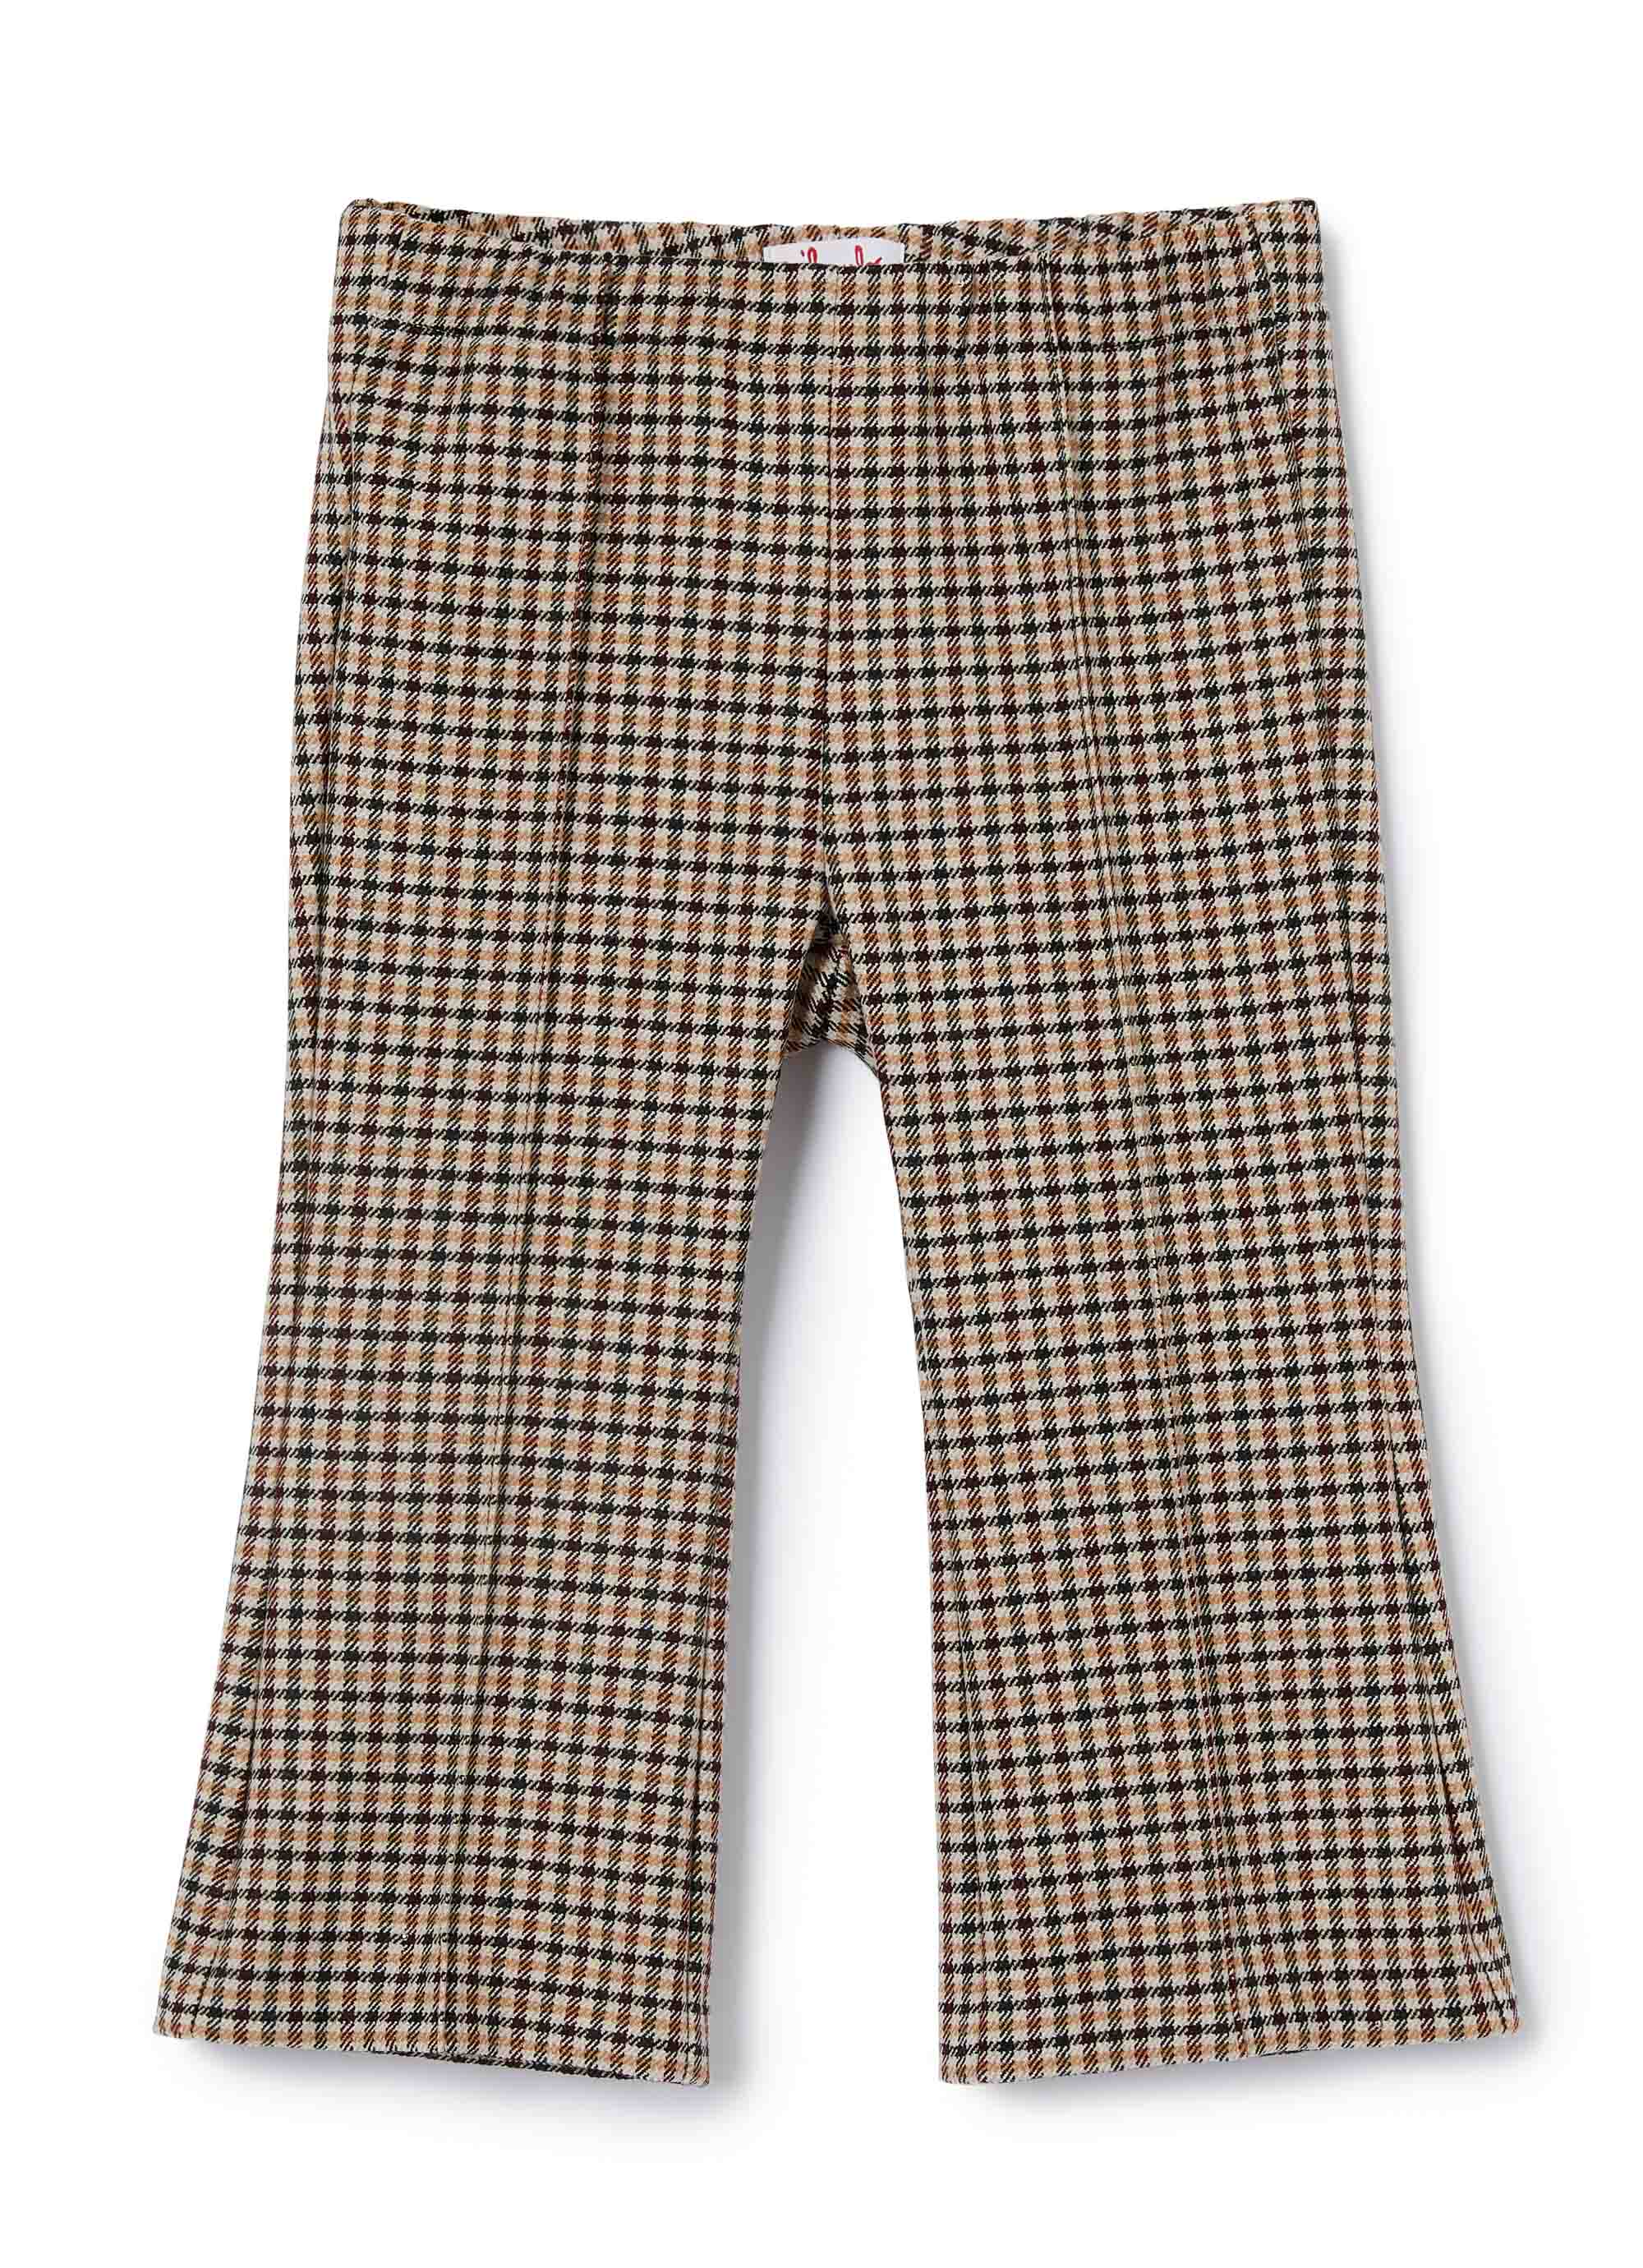 Girls Sand Trousers